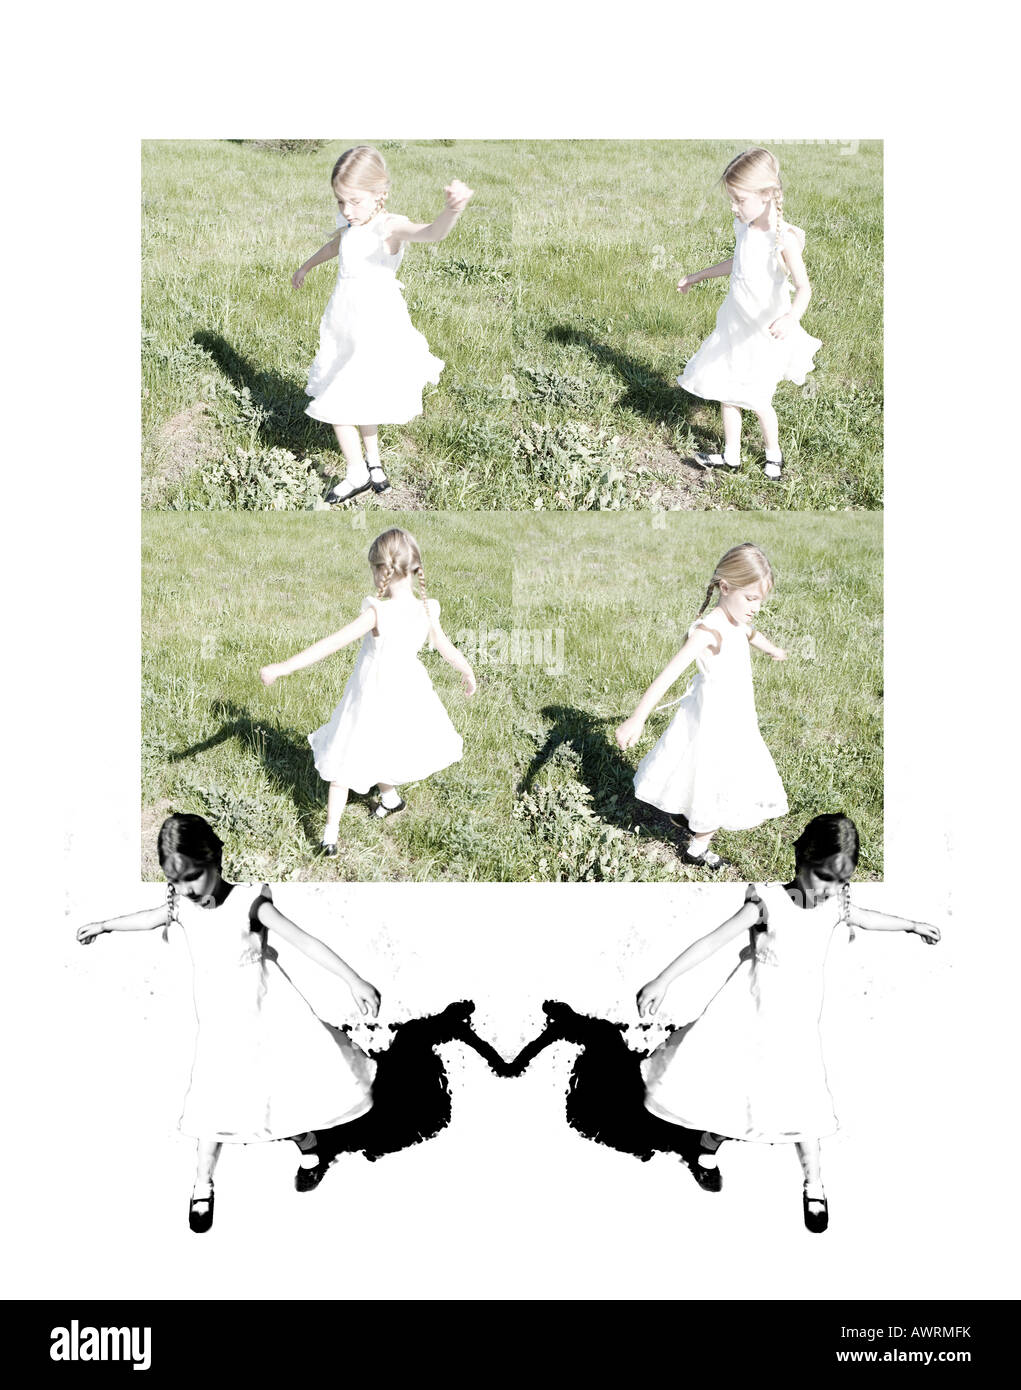 Four images of a girl spinning round, two reflections. Stock Photo